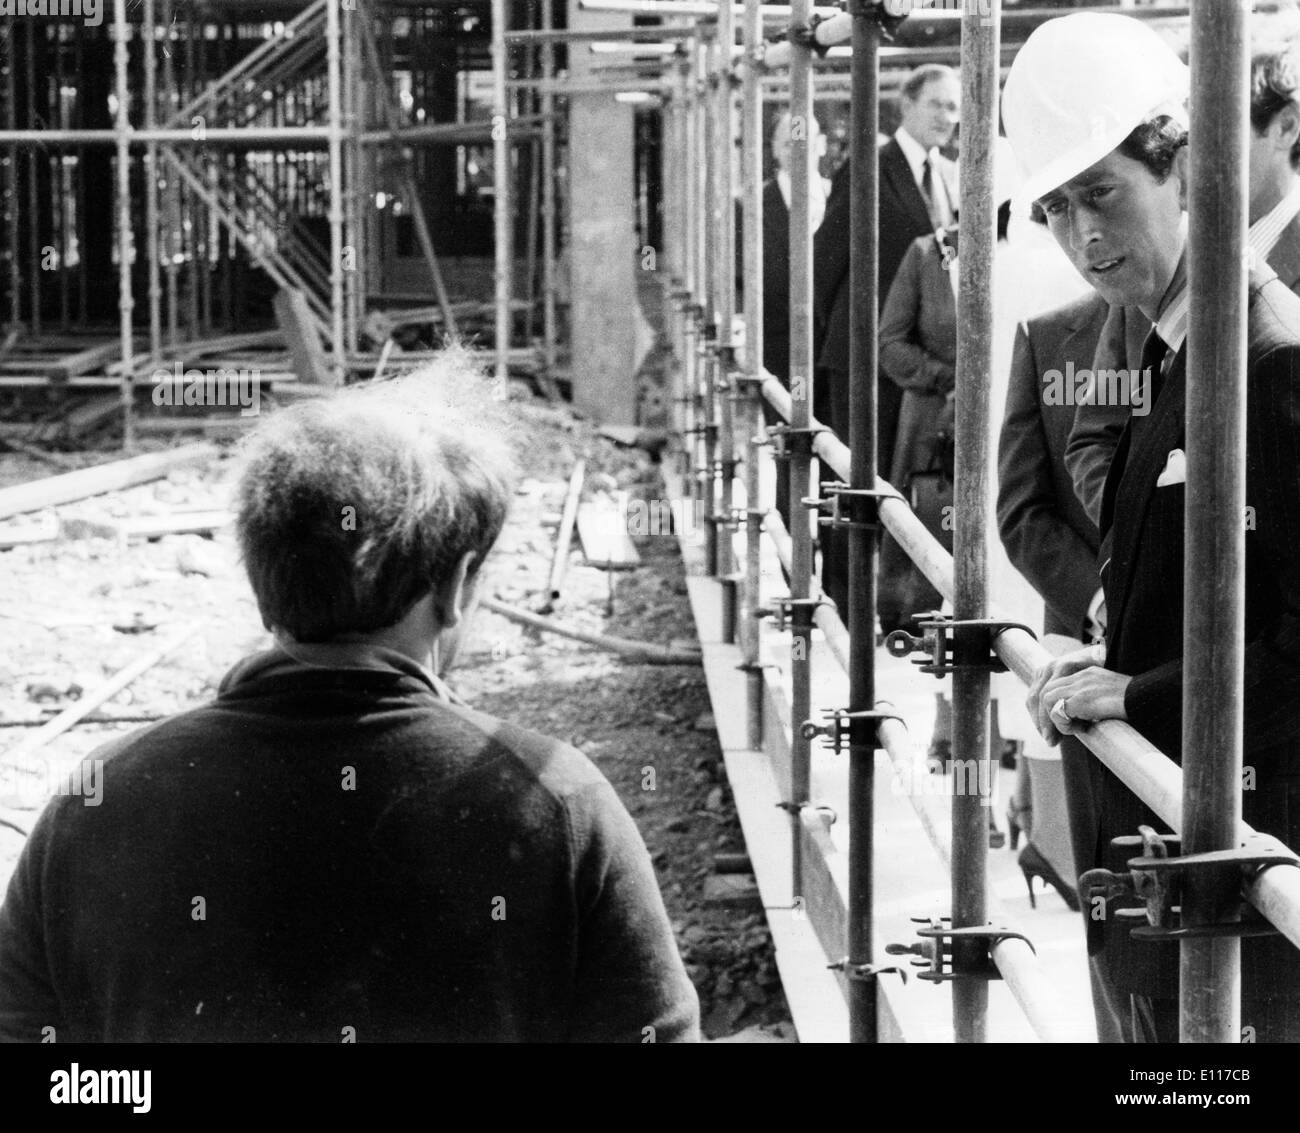 Prince Charles talks with worker on job site Stock Photo